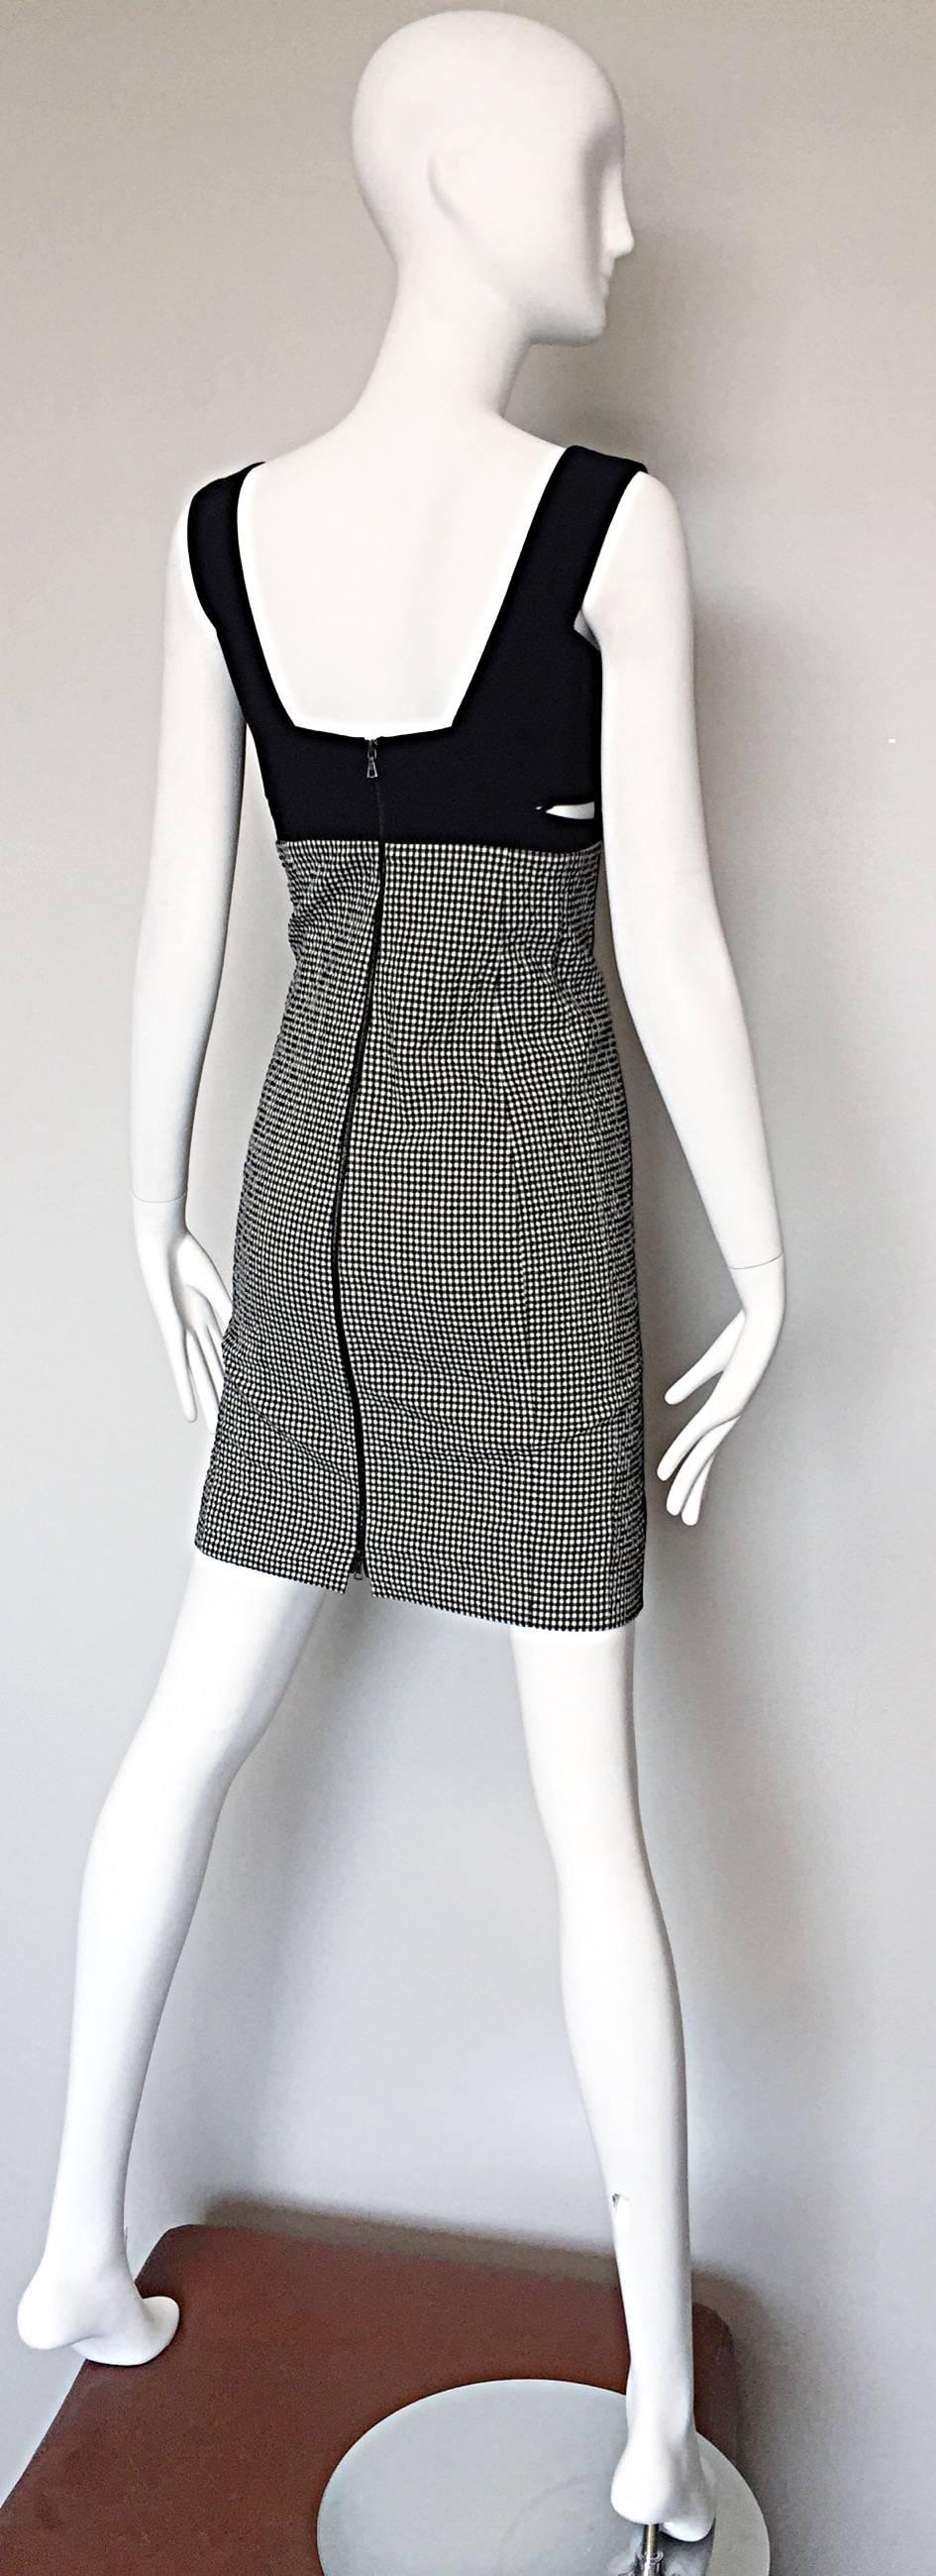 Women's Narcisco Rodriguez Black and White Gingham Cut - Out Runway Dress Size 42 / 6 For Sale